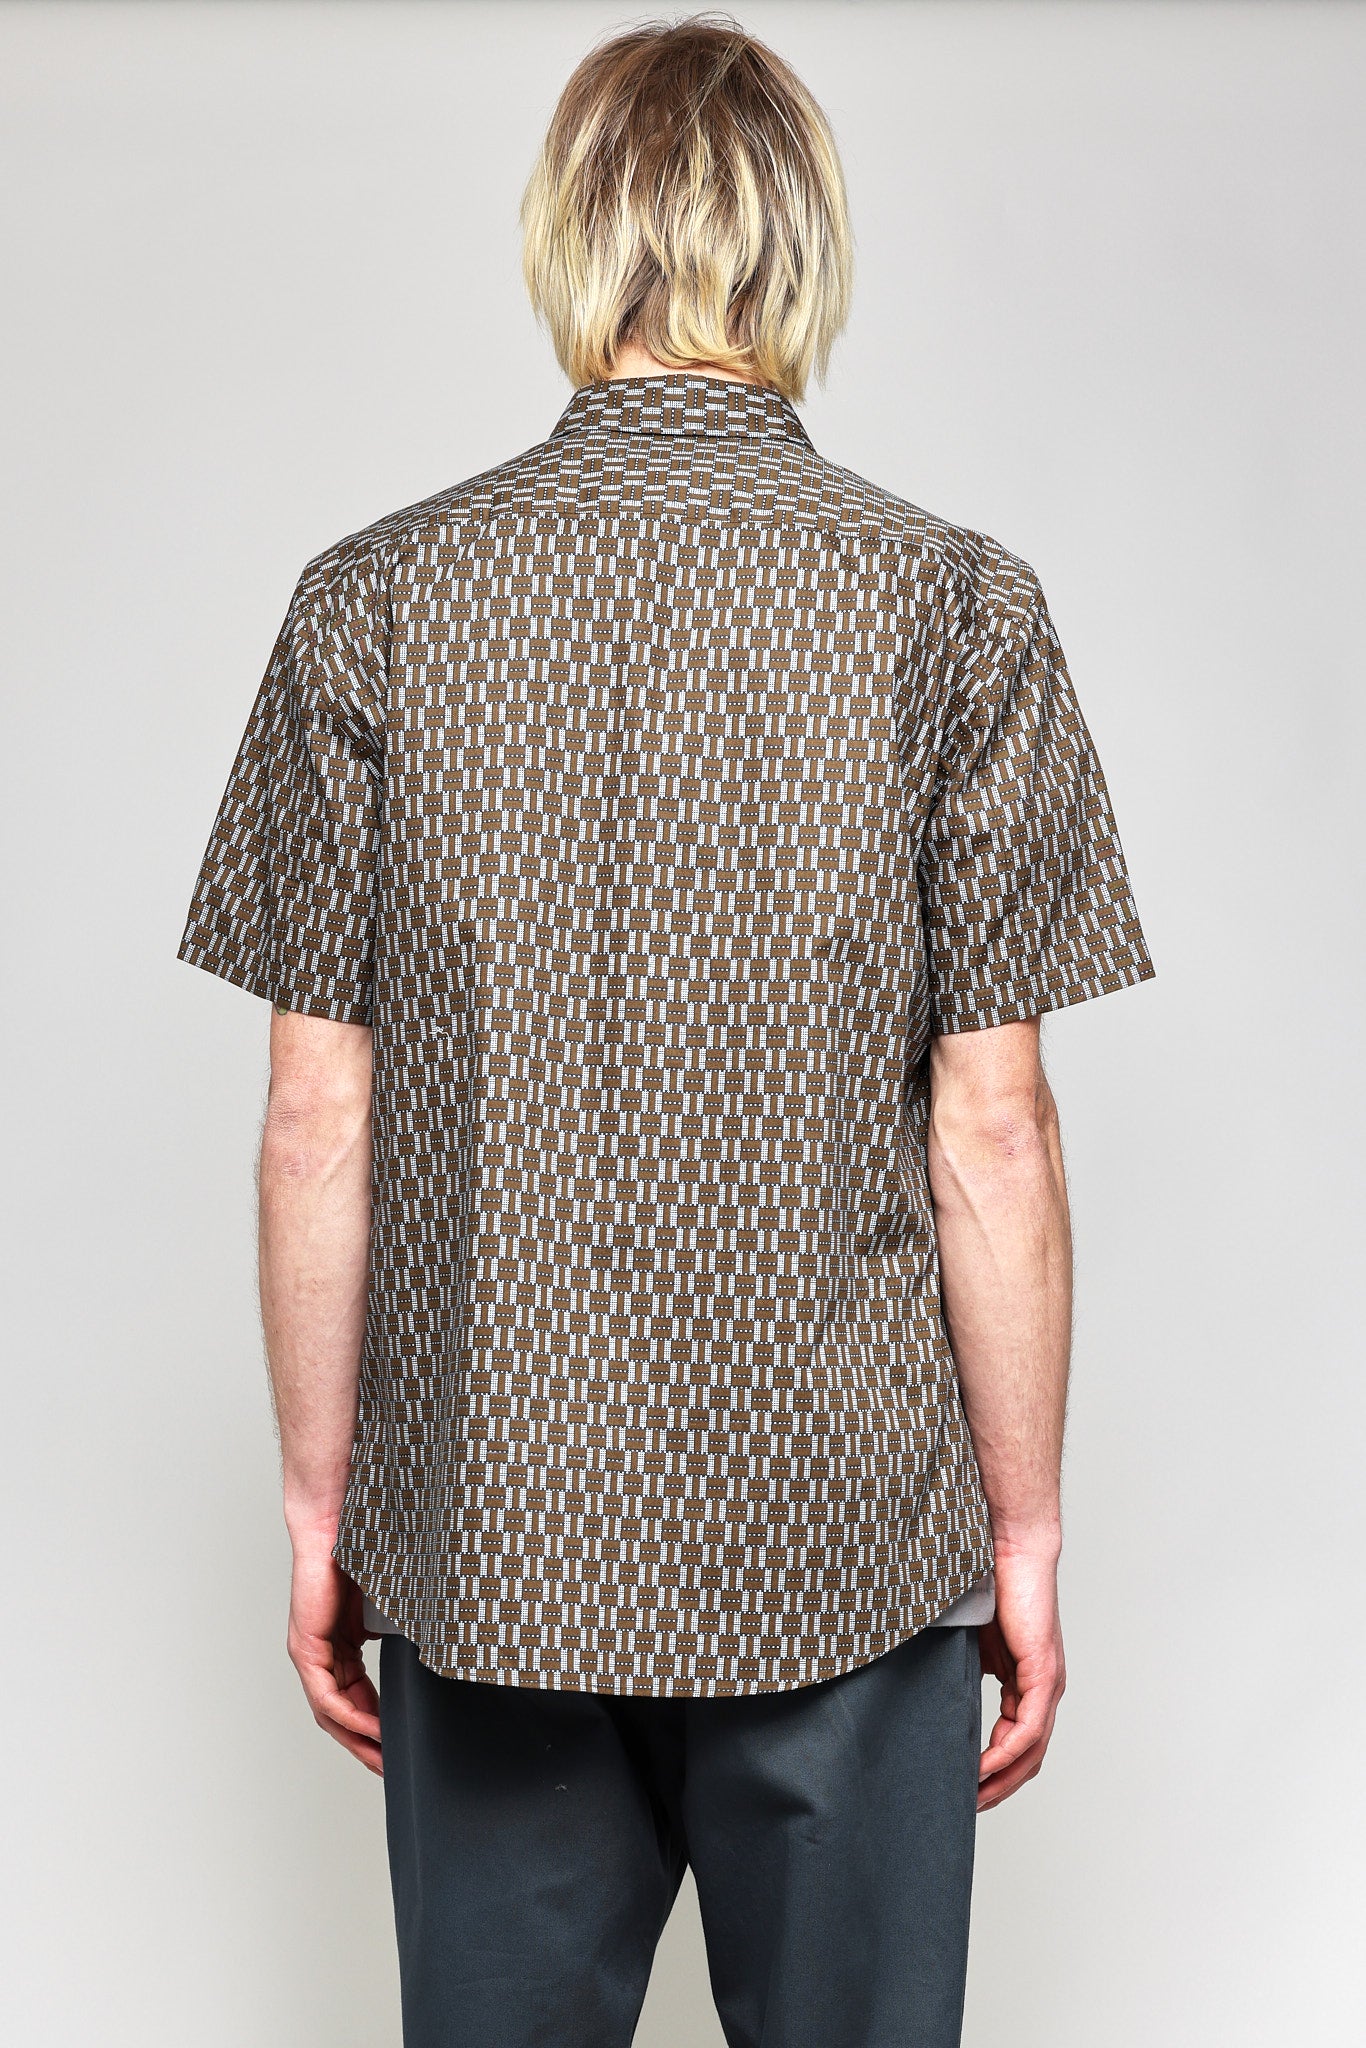 Japanese Graphic Grid Print in Khaki and Blue 03